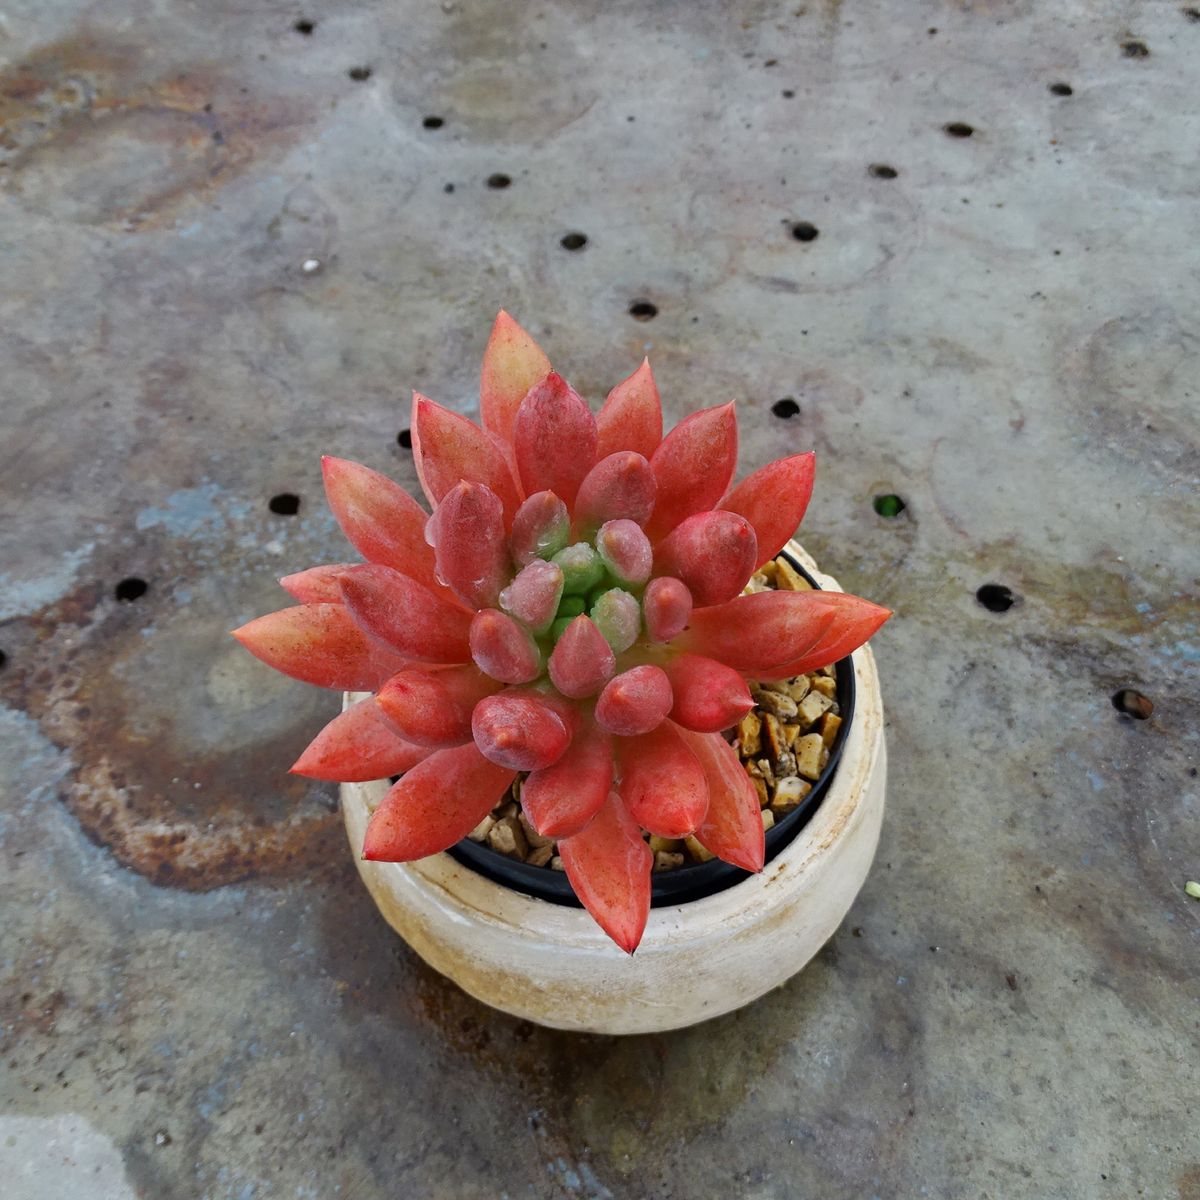 xPachyveria 'Angels Fingers' form red